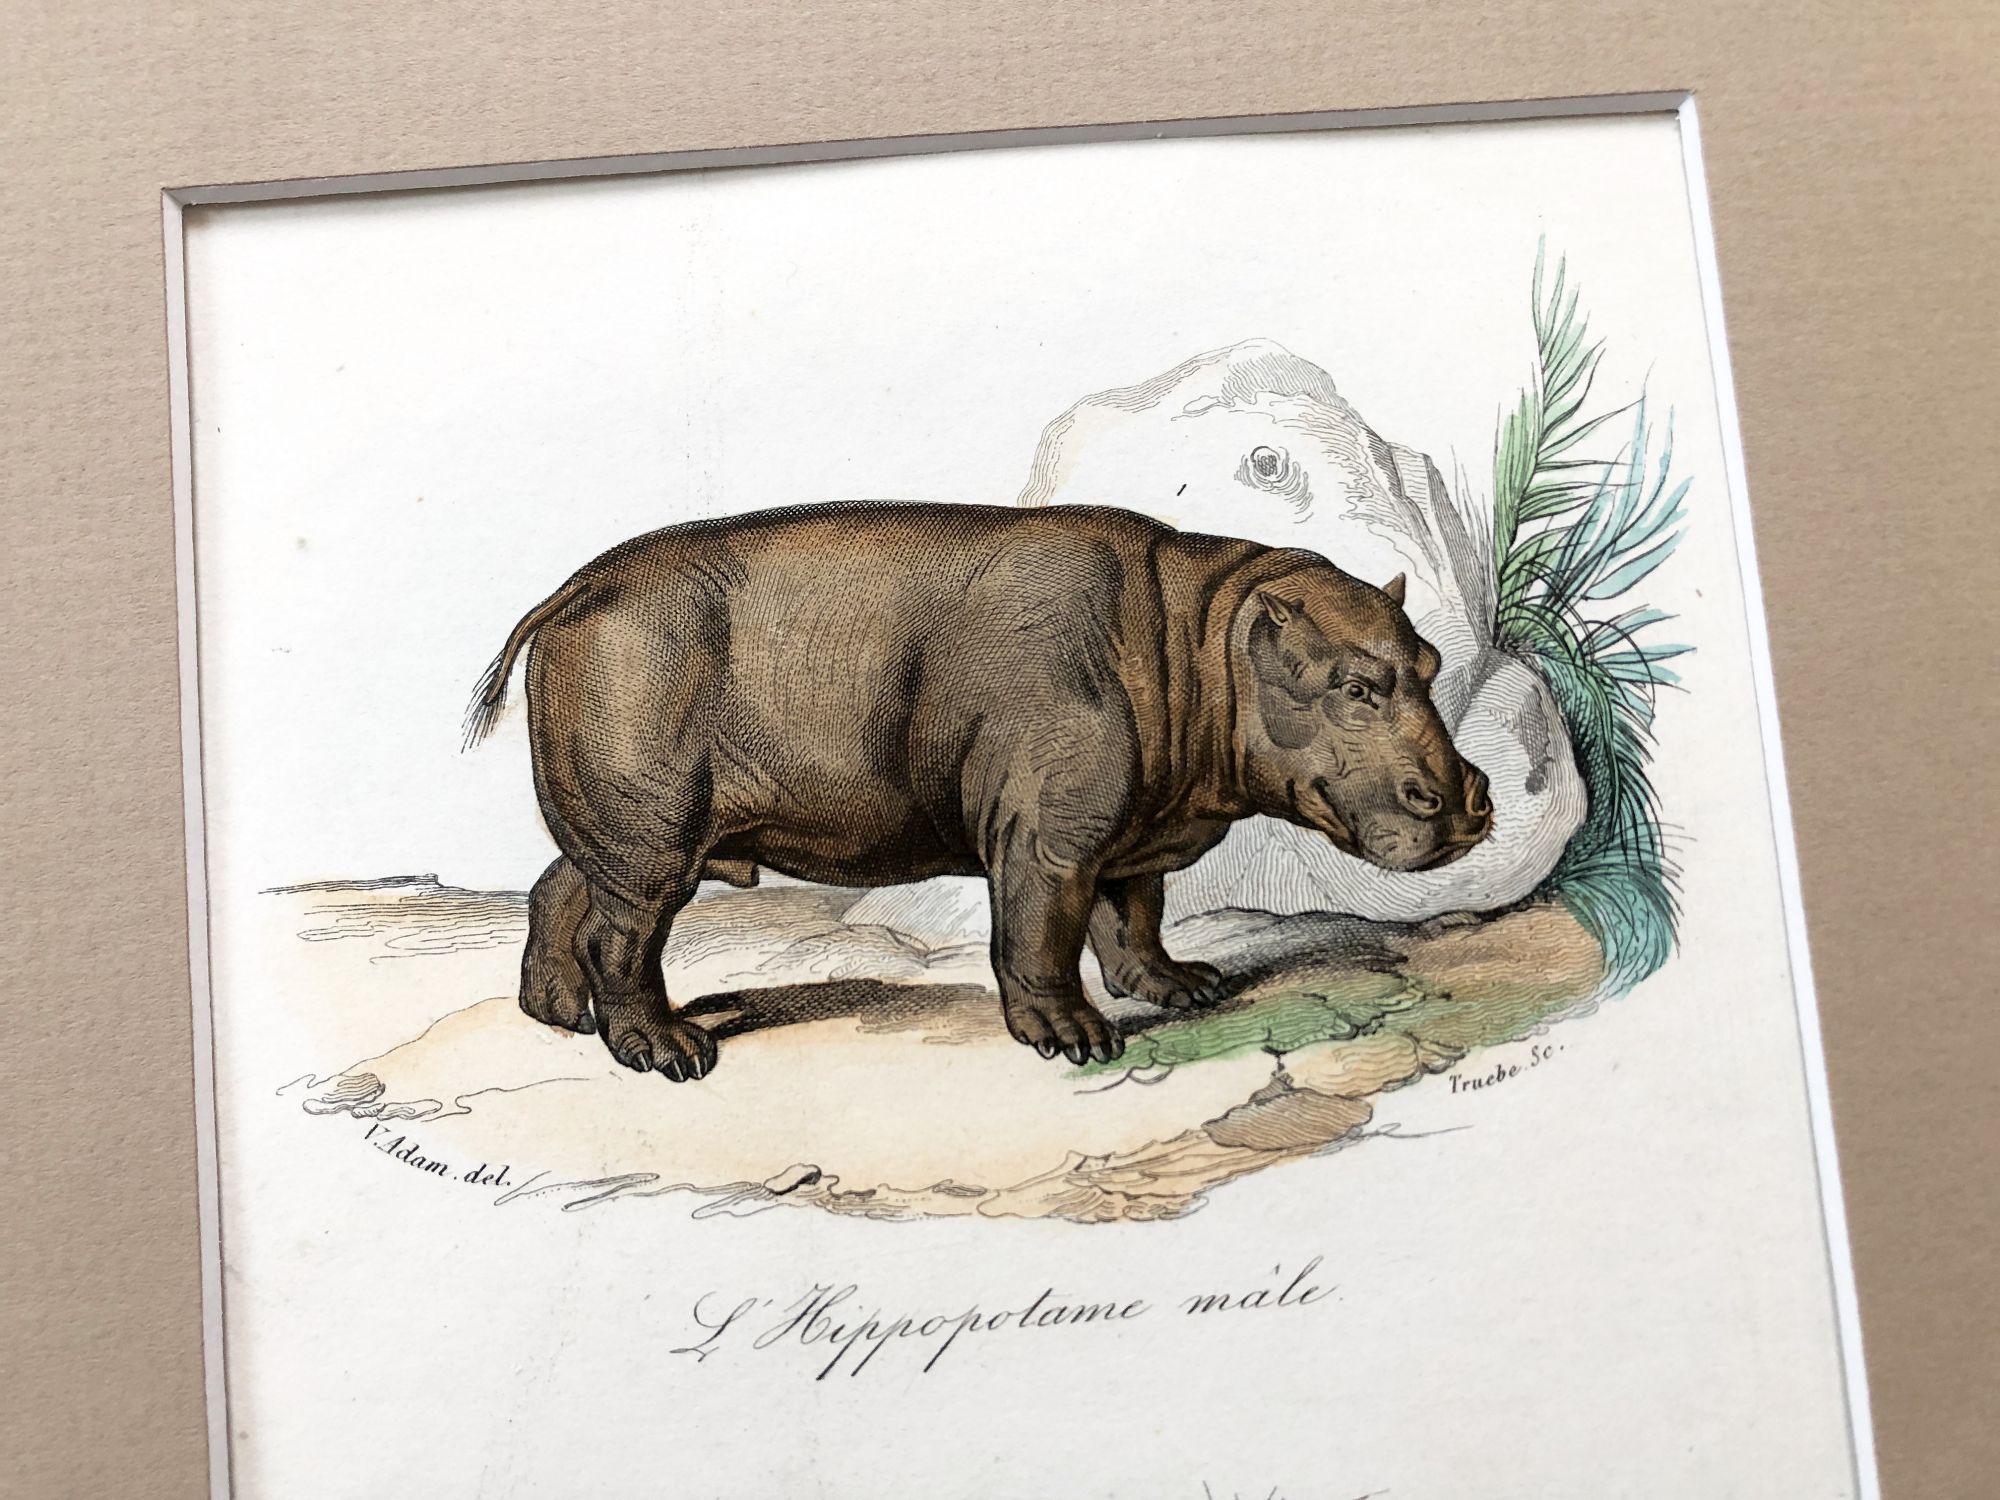 French engraving representing a hippopotamus and a rhinoceros by the drawer Edouard Travies